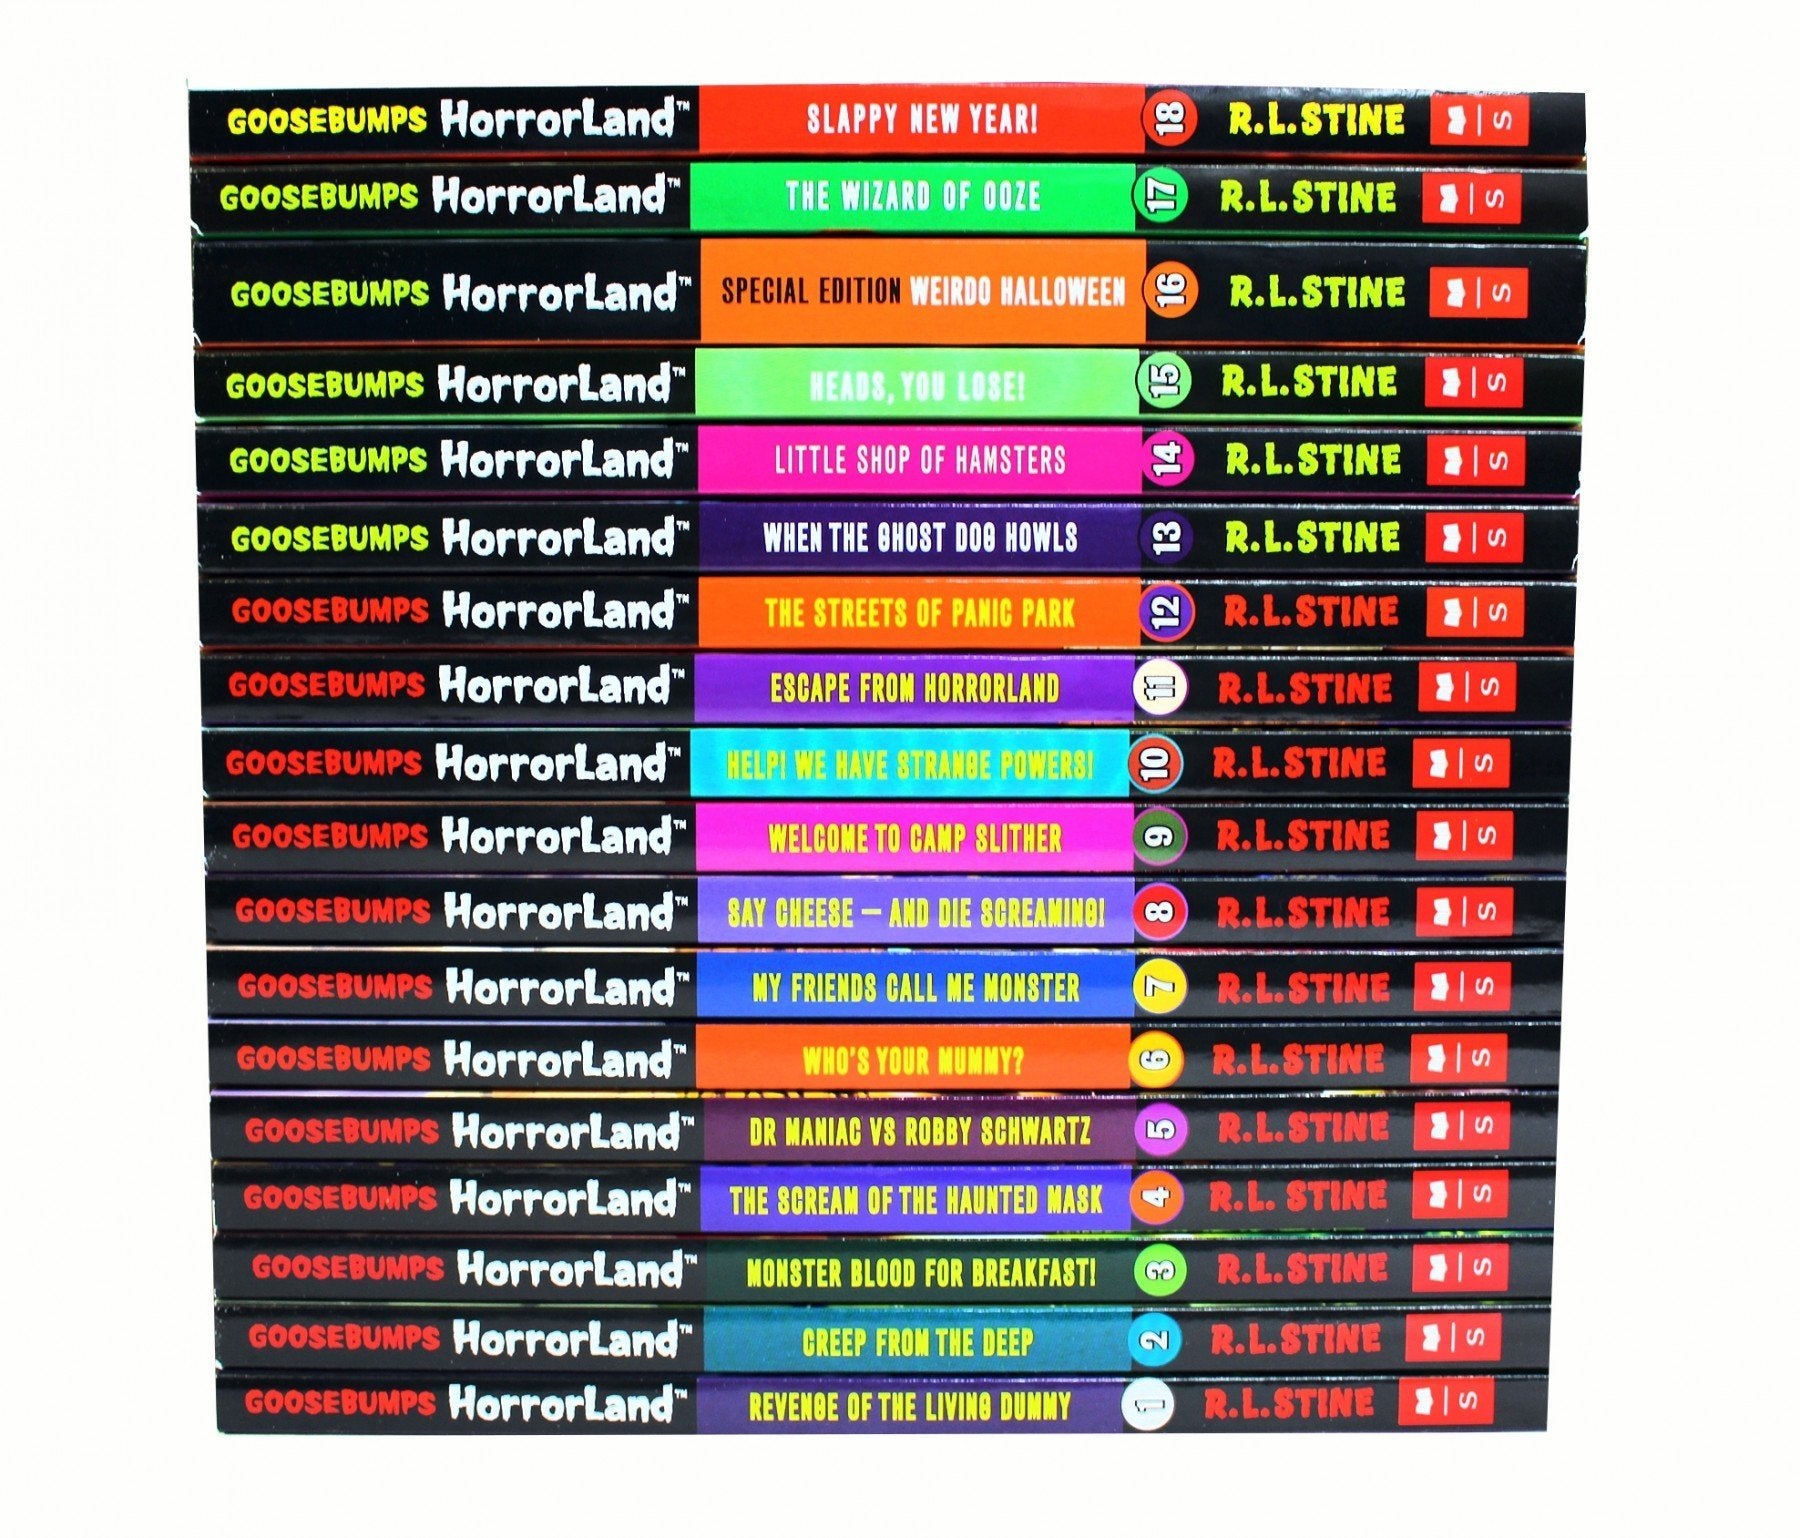 Goosebumps Horrorland Series 18 Books Children Collection Paperback By R L Stine - St Stephens Books